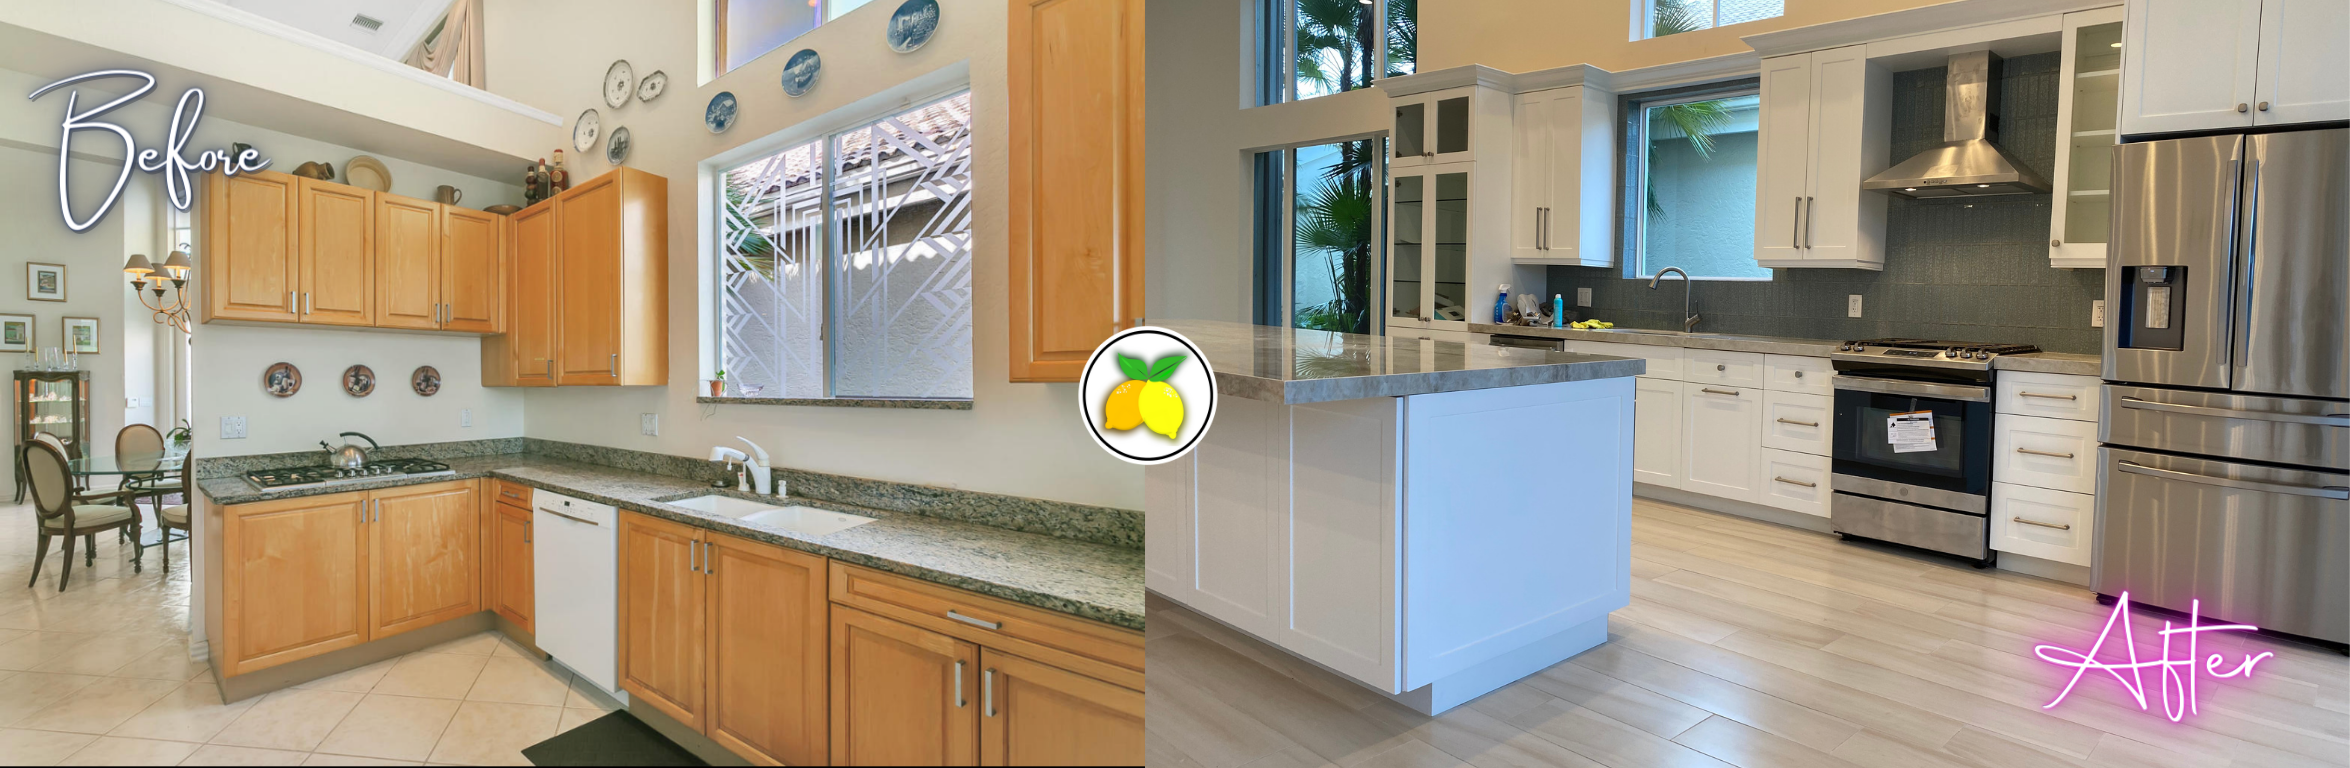 From left before and after:   BallenIsles Country Club full kitchen renovation 